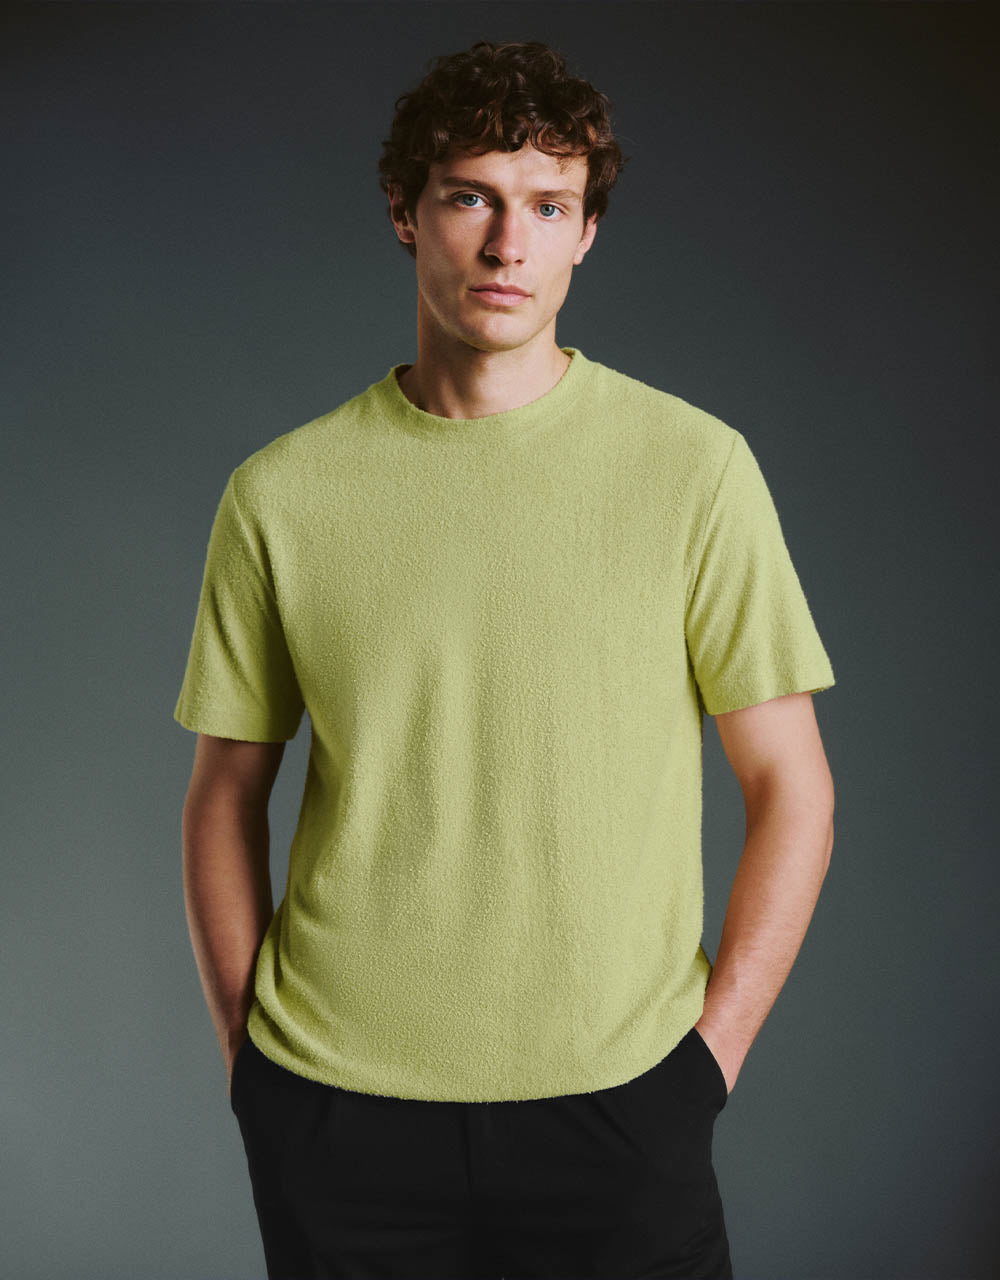 Crew Neck Knitted T-Shirt